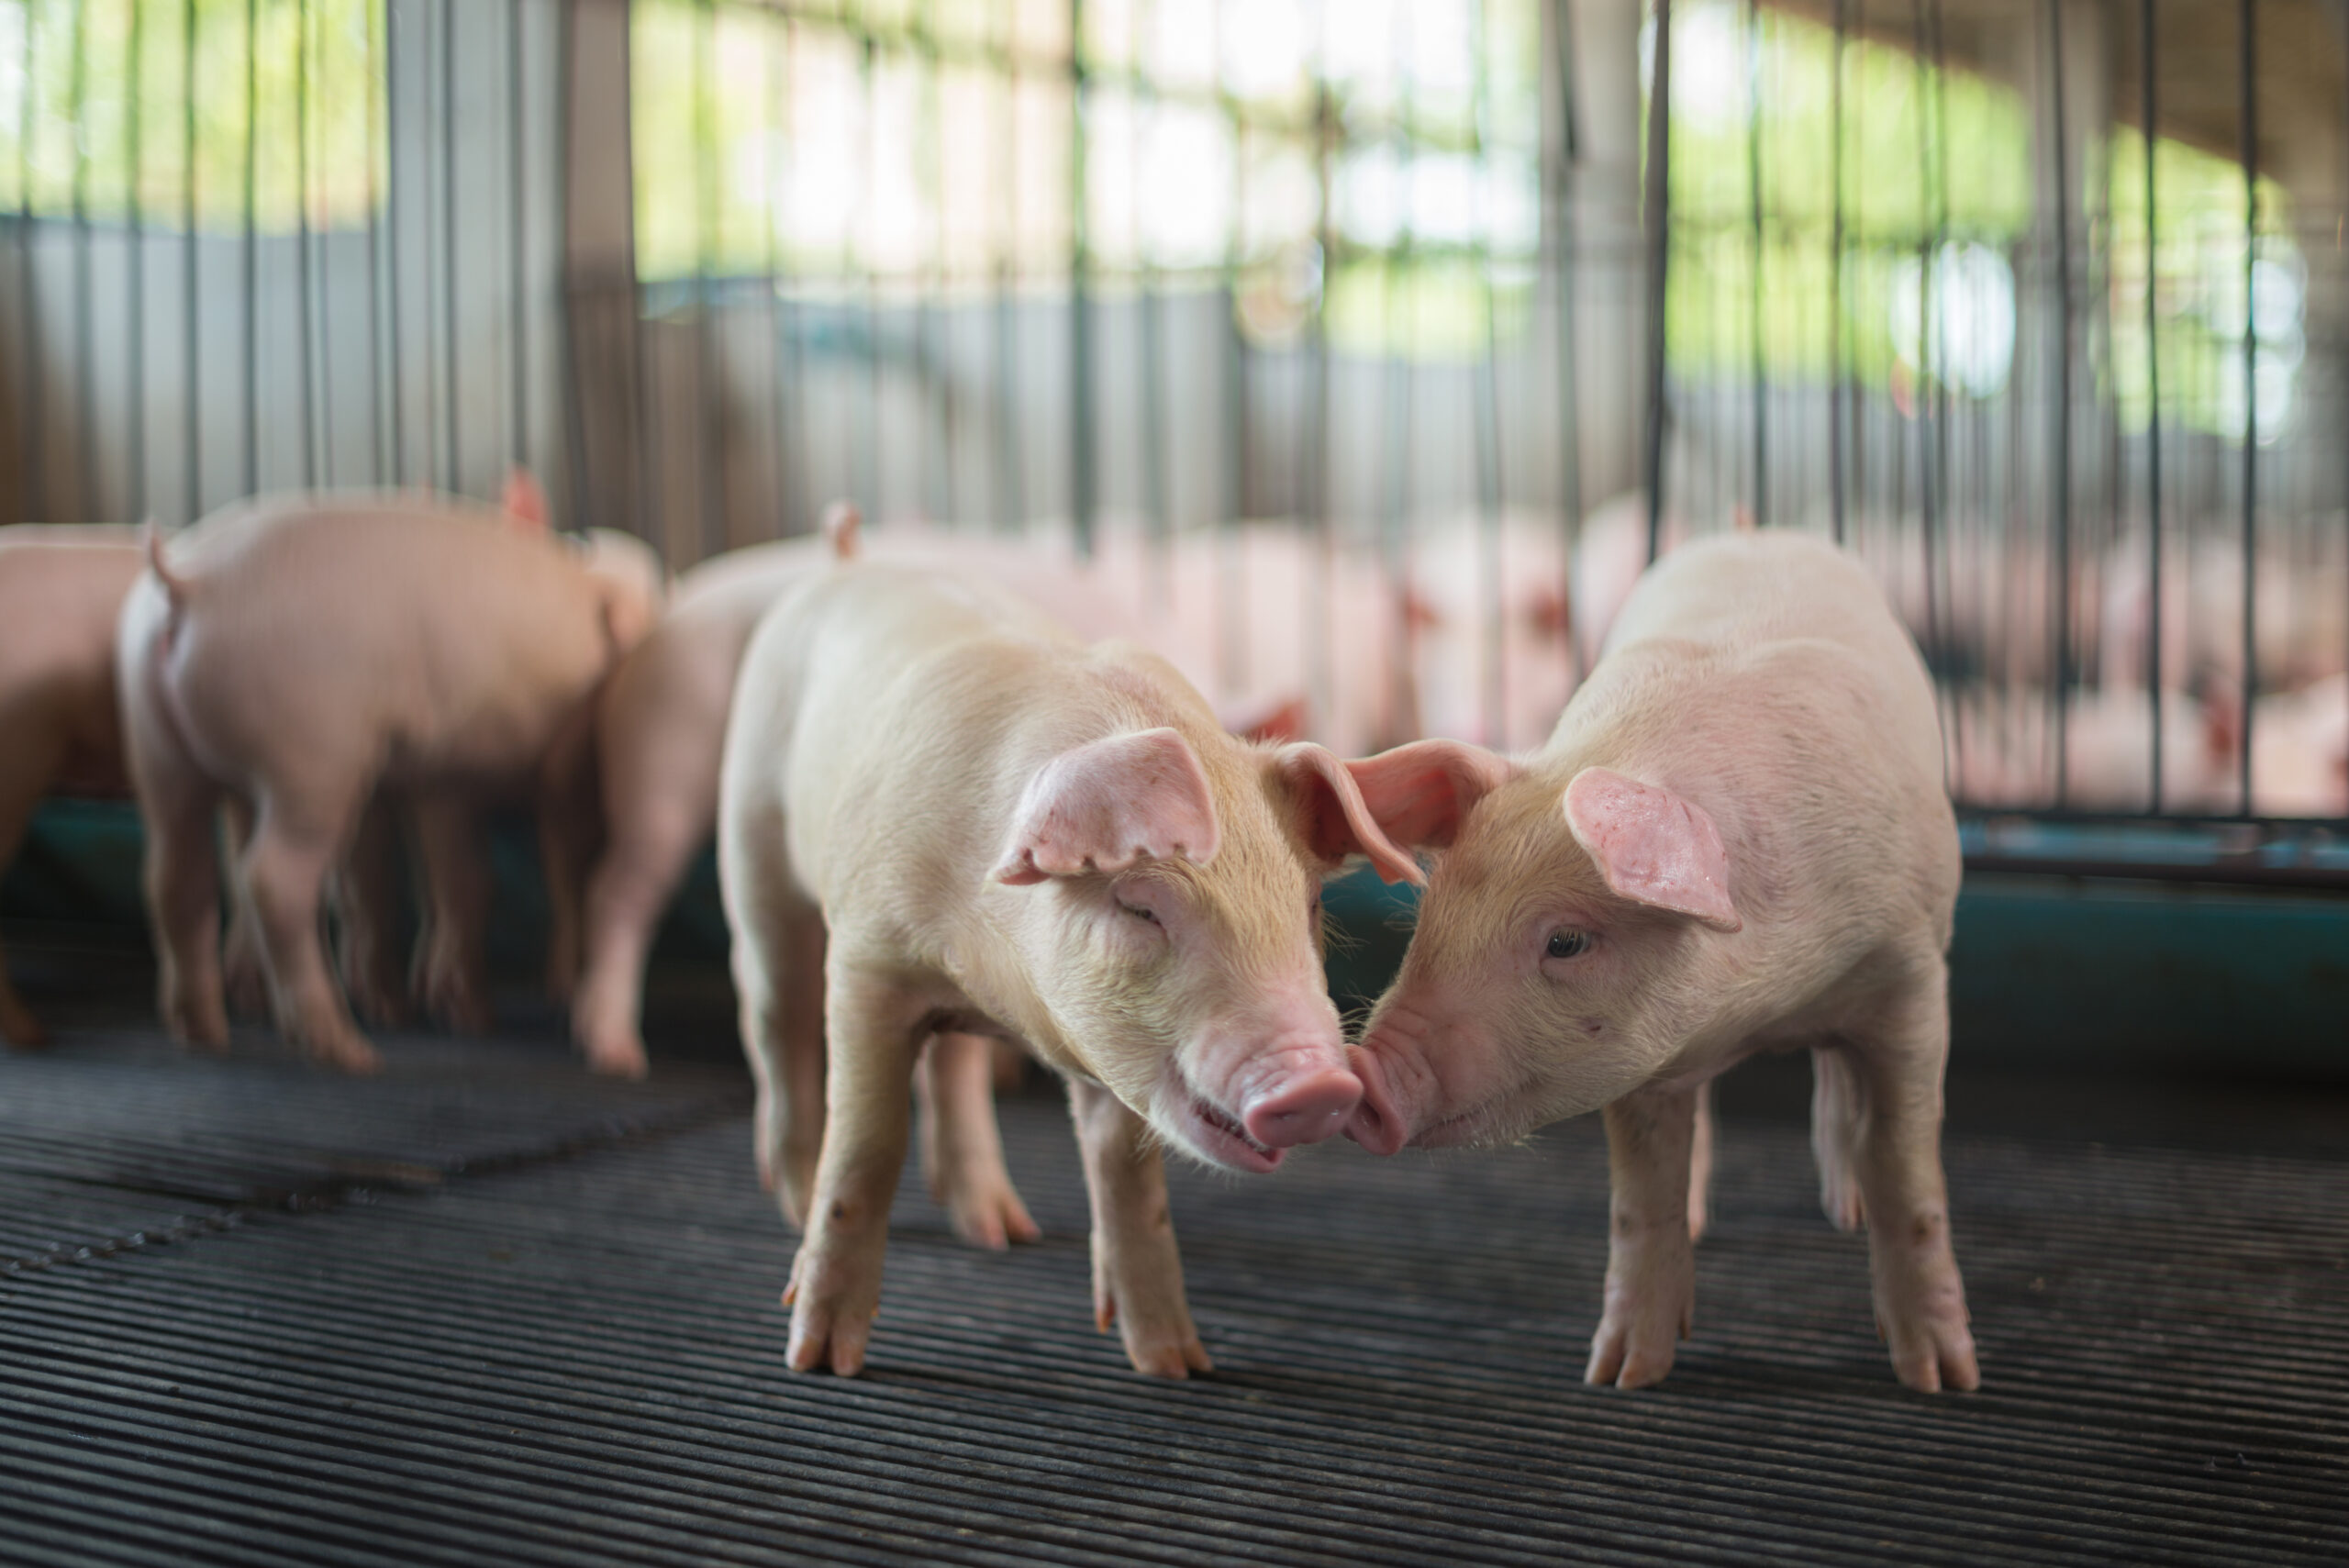 SCOTUS hears pork producer challenge to California animal rights law